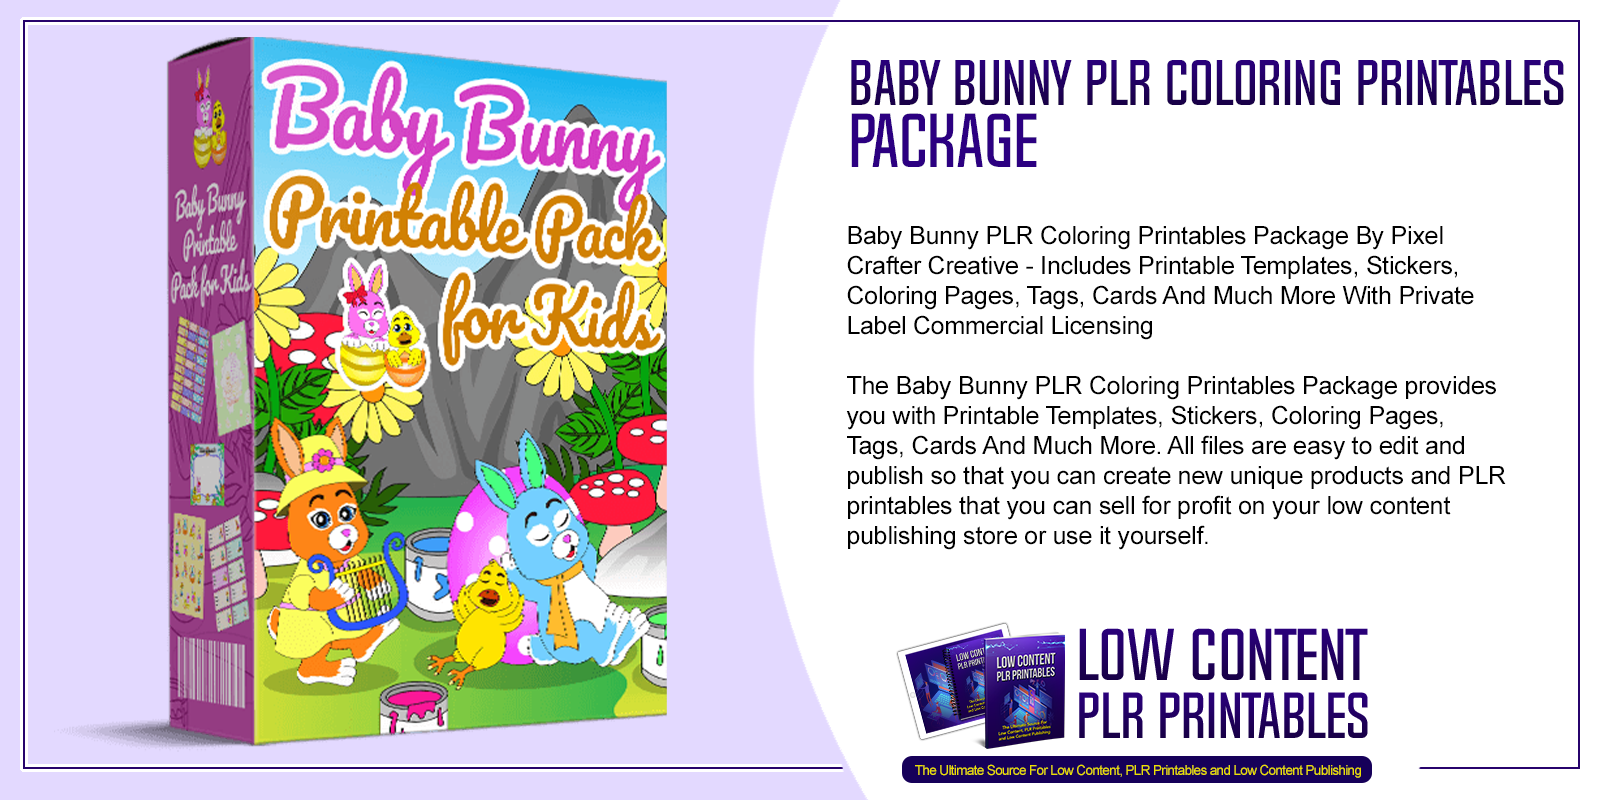 Baby Bunny PLR Coloring Printables Package